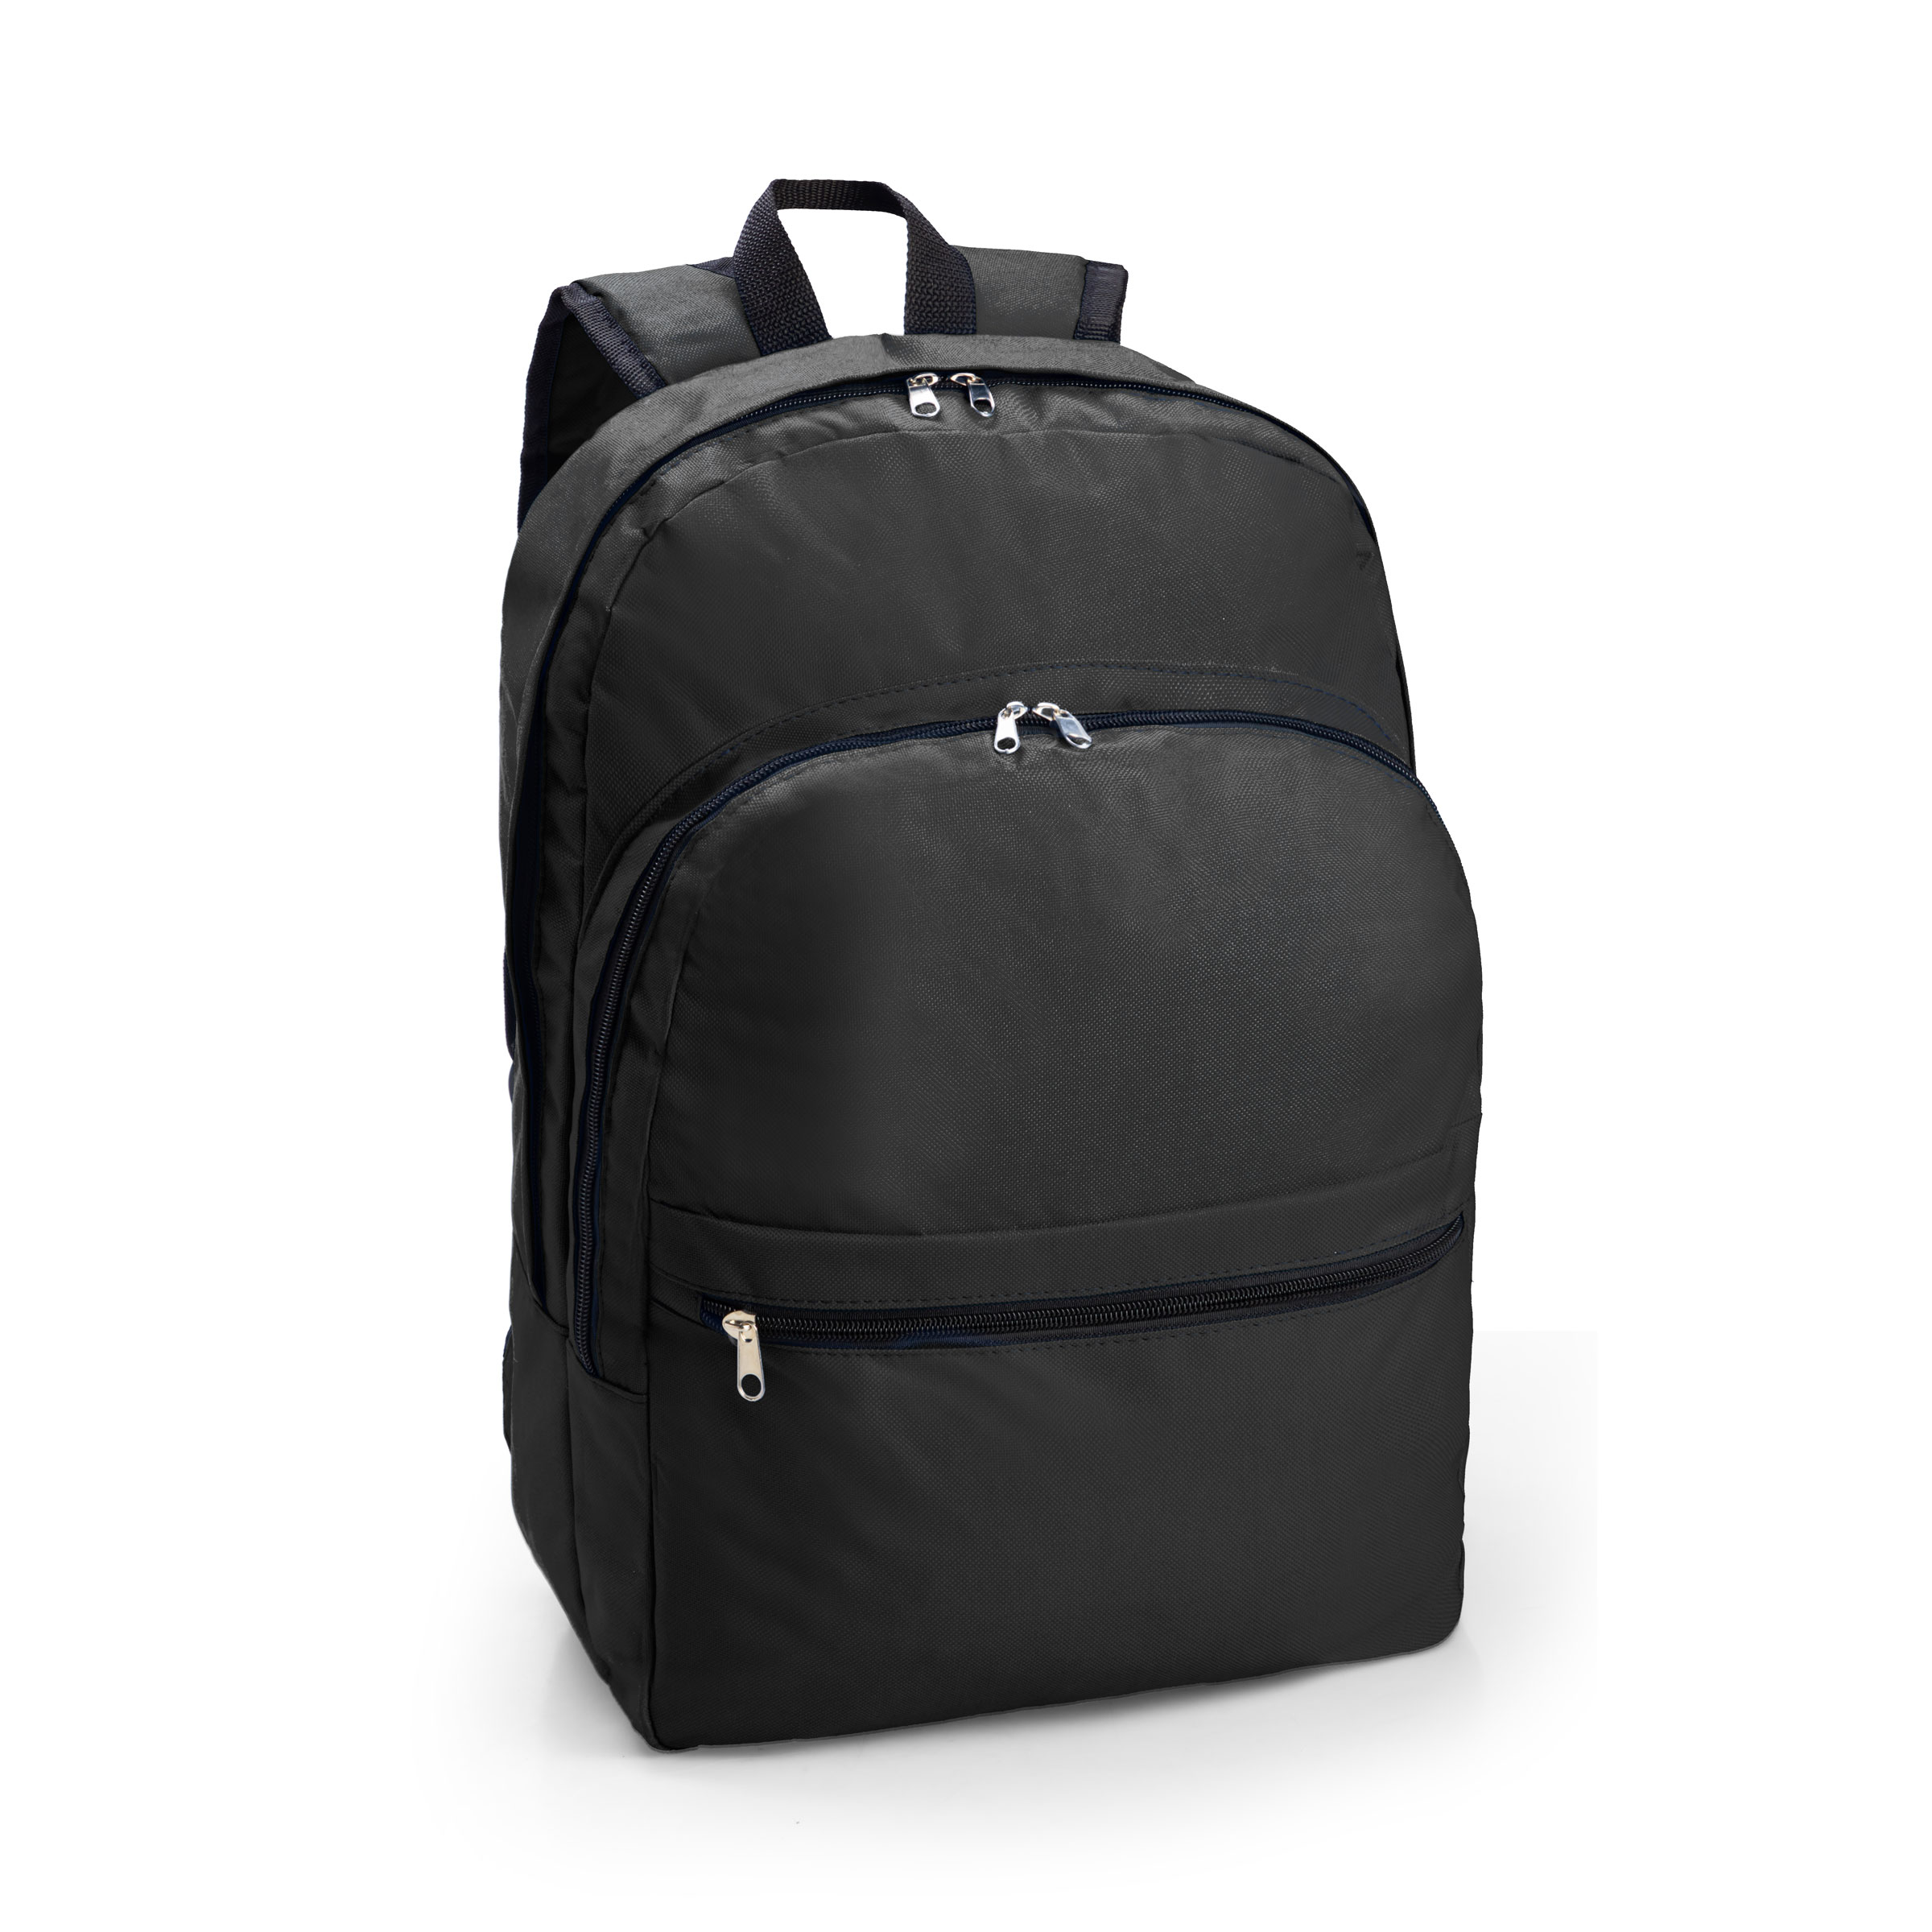 York Backpack Product Image